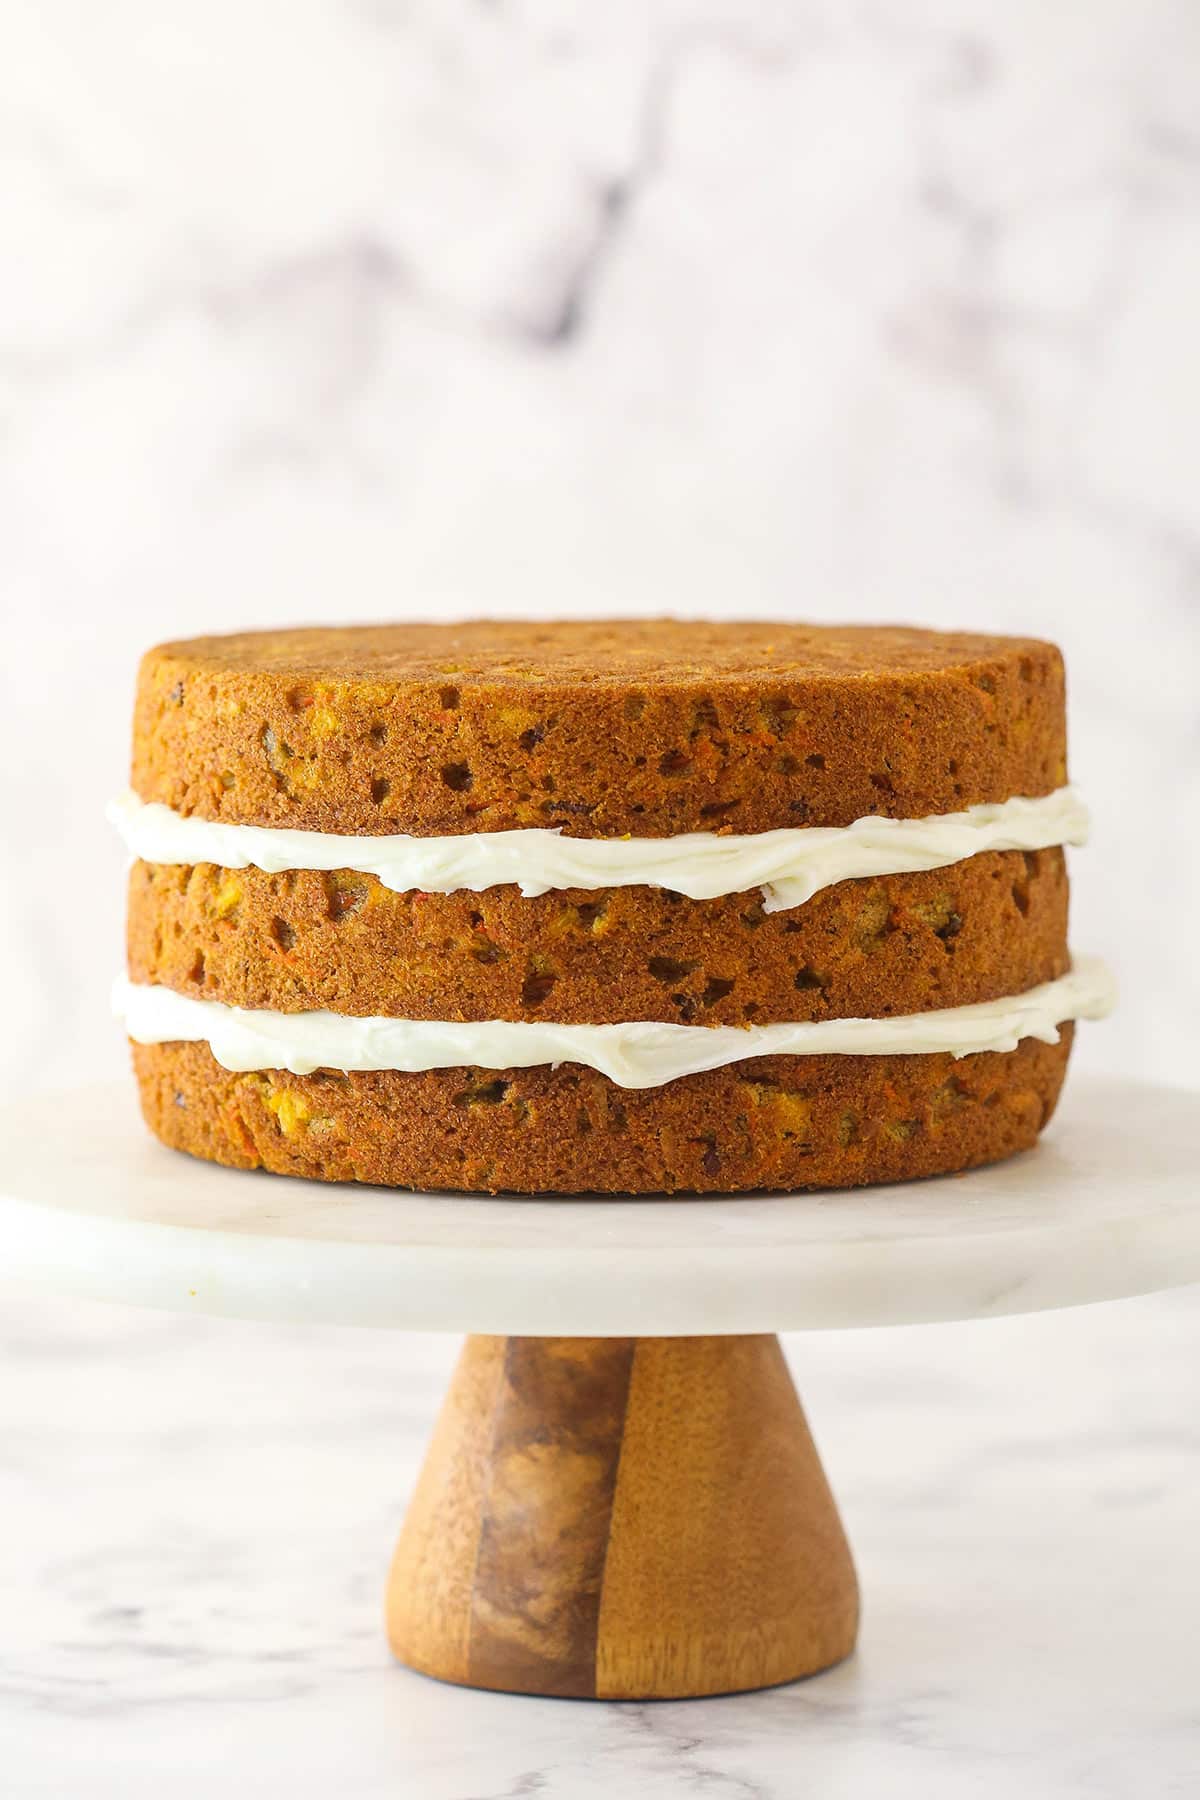 Stacking and filling carrot cake layers with cream cheese frosting.